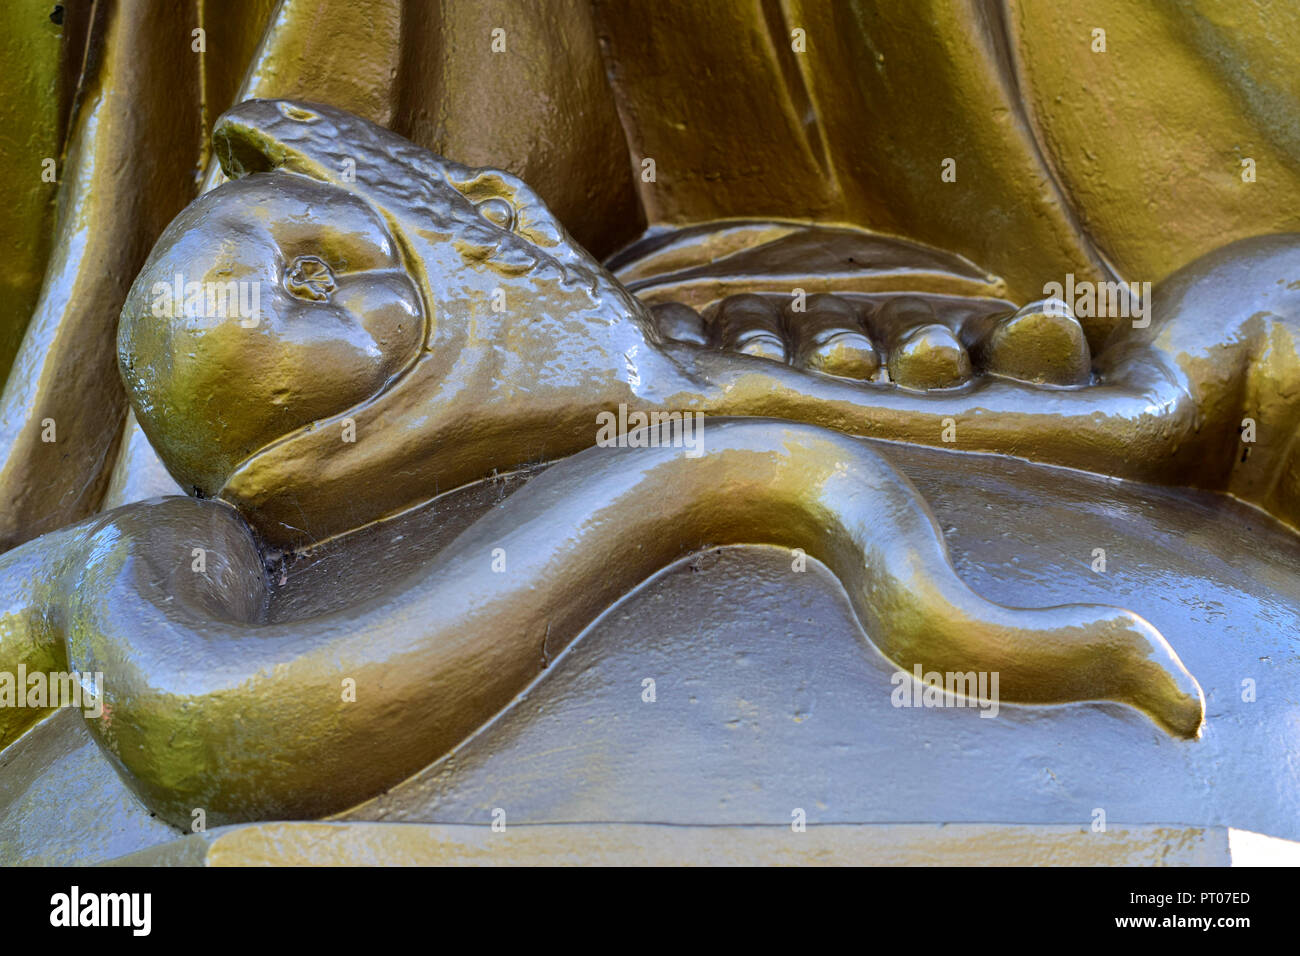 The serpent swallowing a fruit from the tree of knowledge. Section of a sculpture in St-Anne de Beaupré, Canada Stock Photo